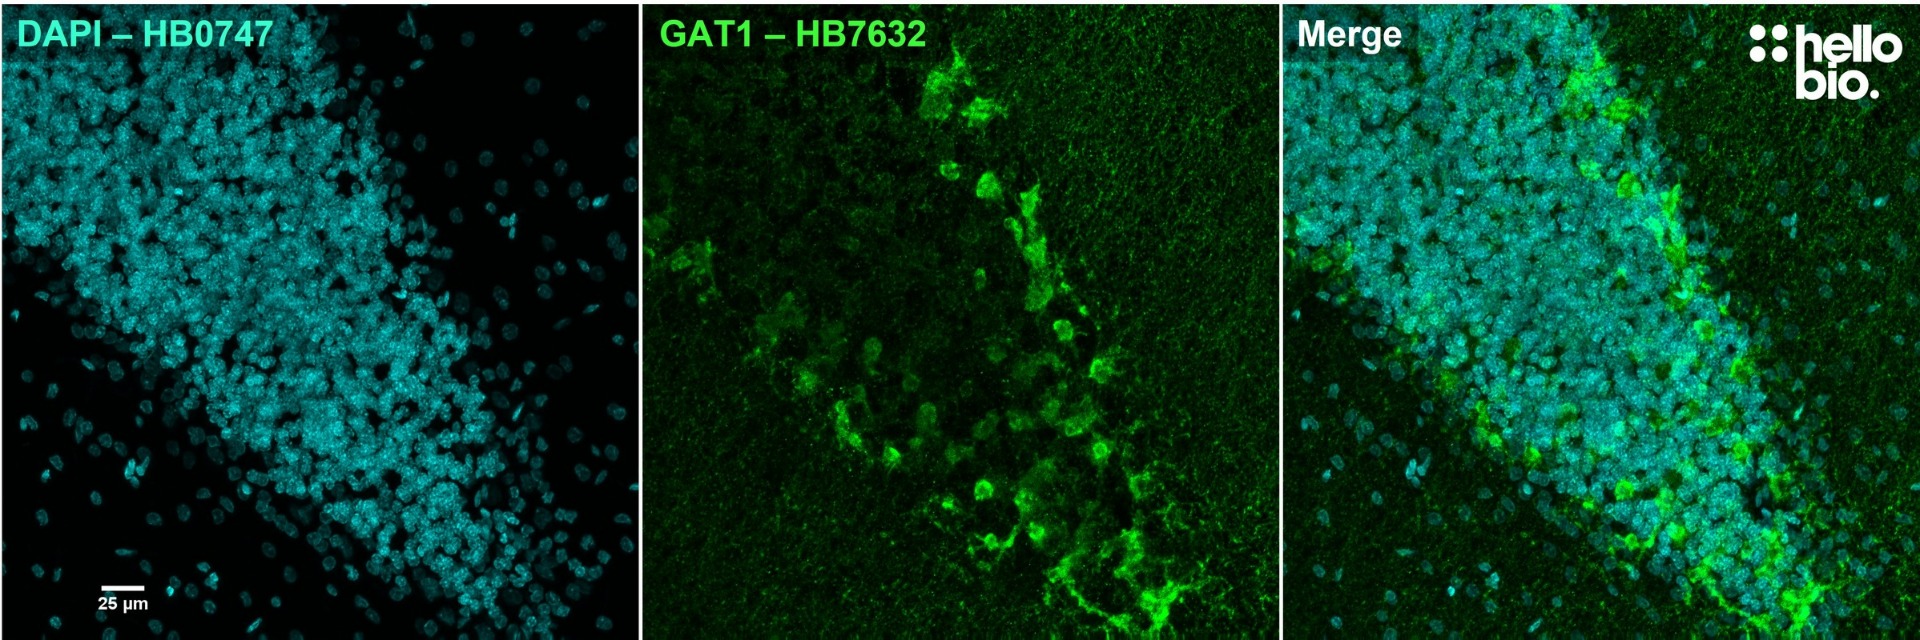 Figure 1. GAT1 staining in GABAergic interneurons of the cerebellum using HB7632. 